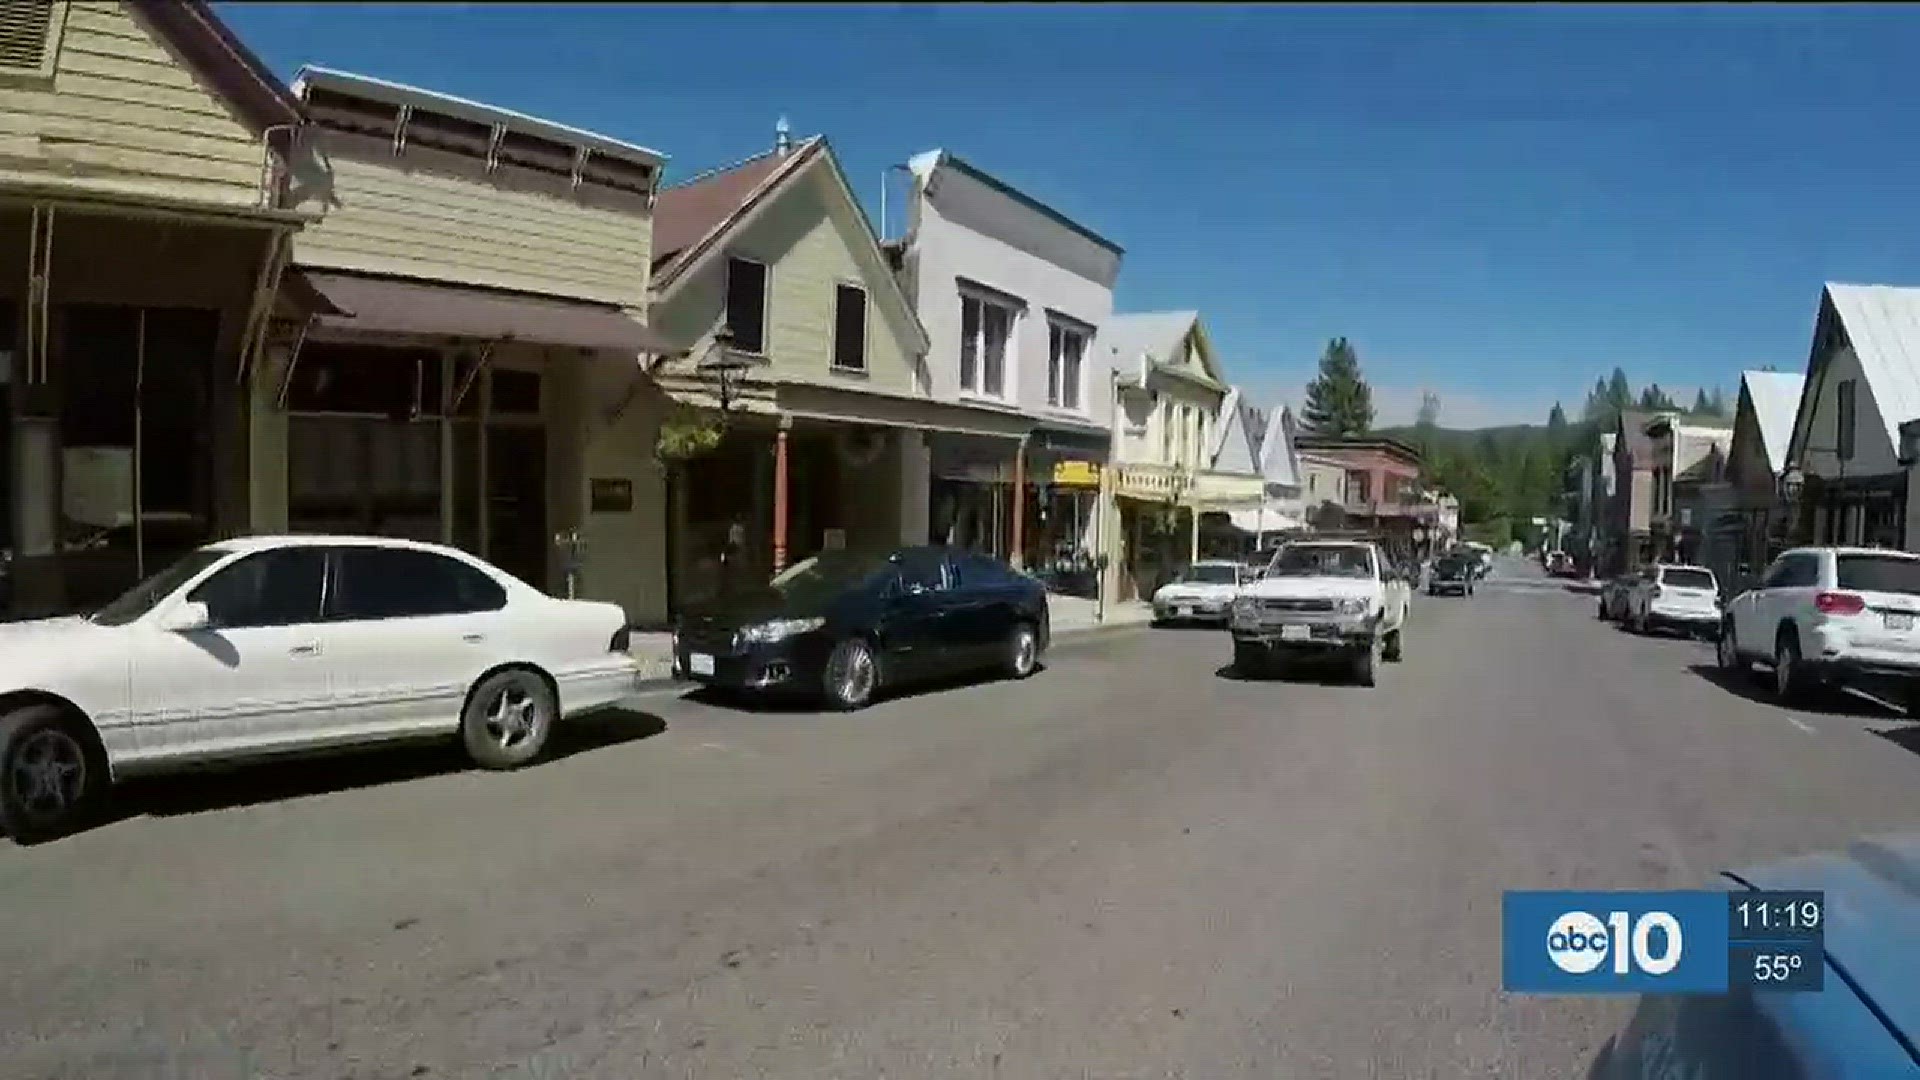 Is Nevada City really among the top 10 most dangerous cities in California? ABC10 investigative reporter Lilia Luciano finds out more. (Nov. 9, 2016)